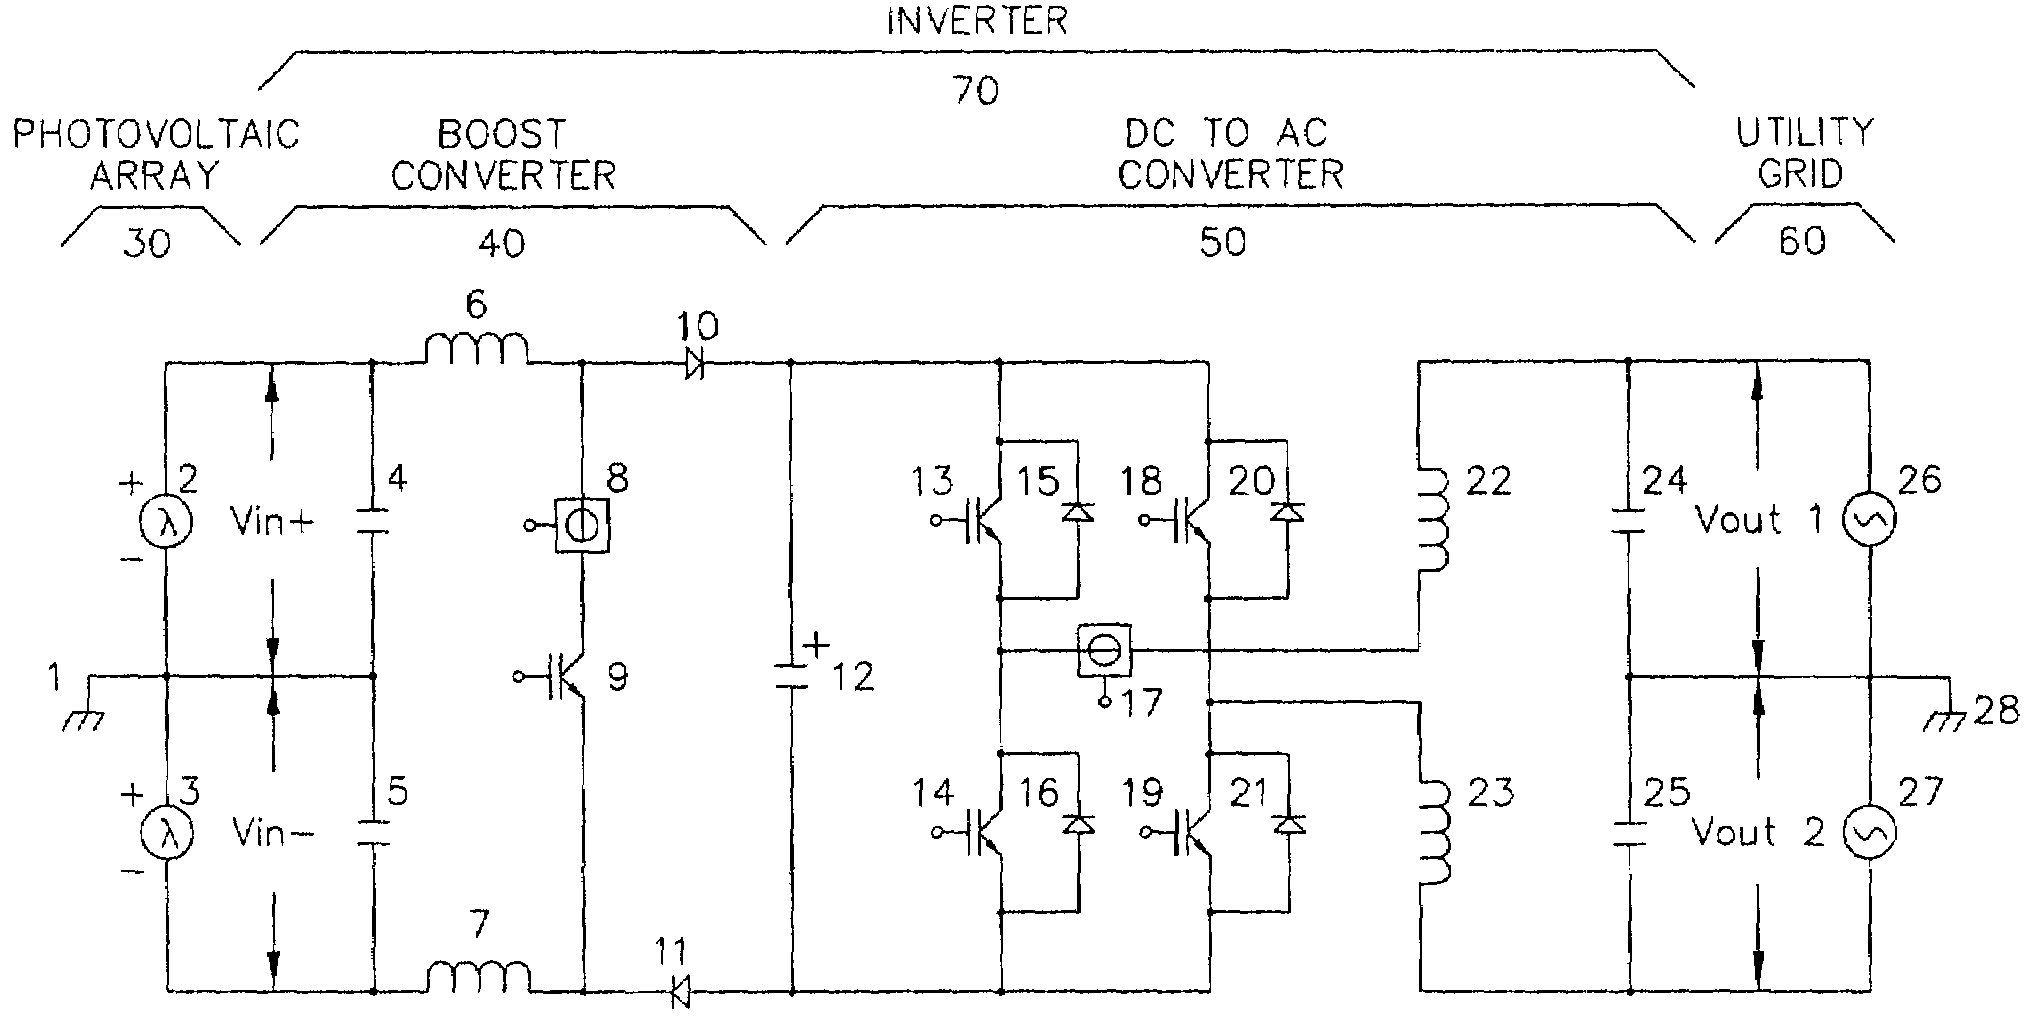 DC to AC inverter with single-switch bipolar boost circuit